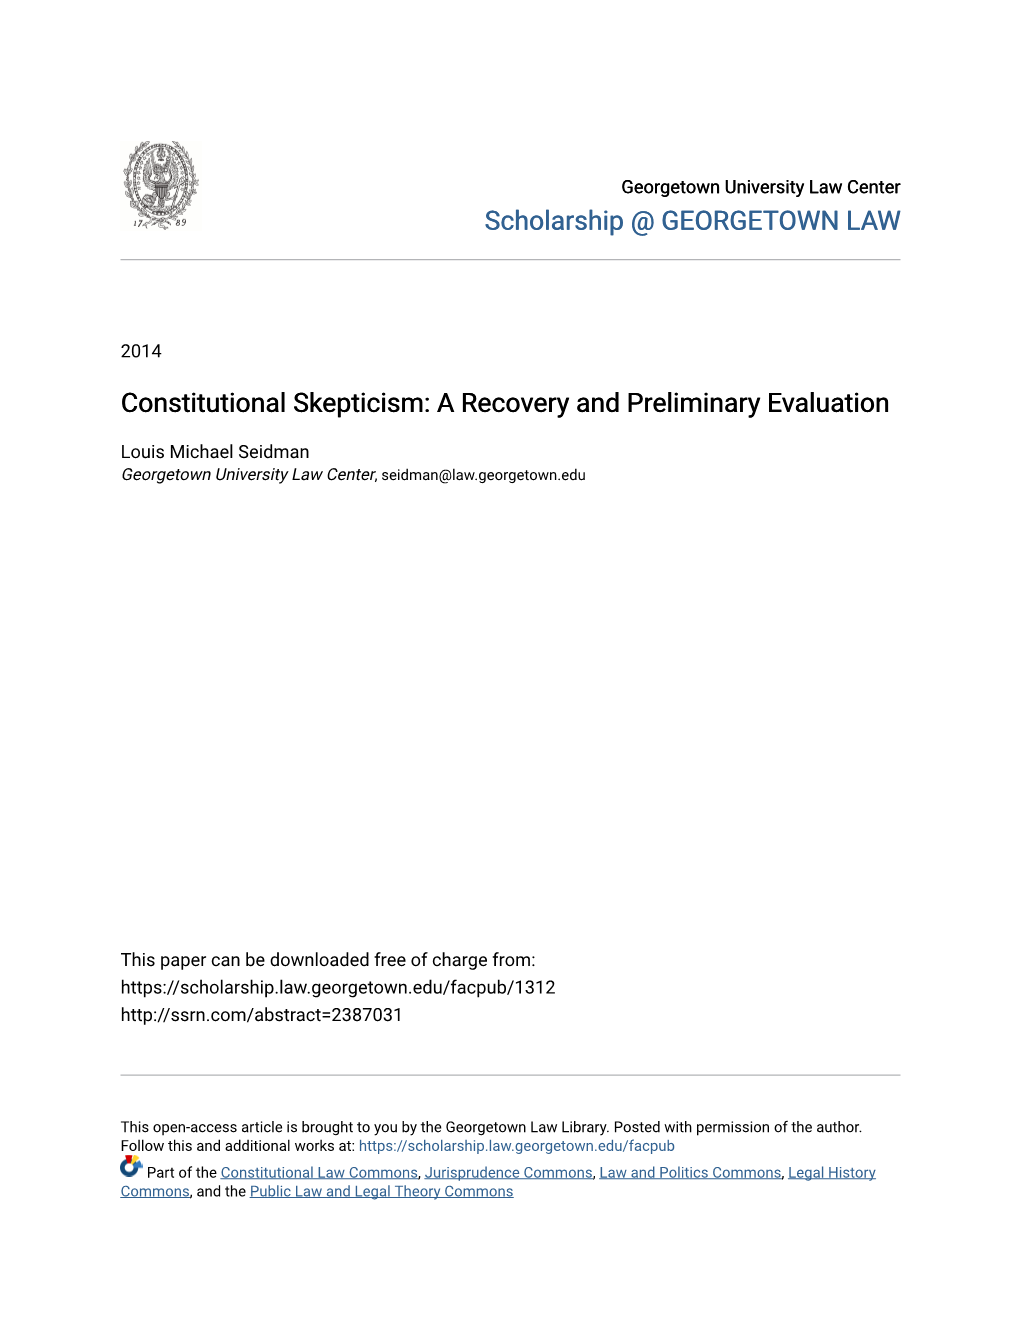 Constitutional Skepticism: a Recovery and Preliminary Evaluation